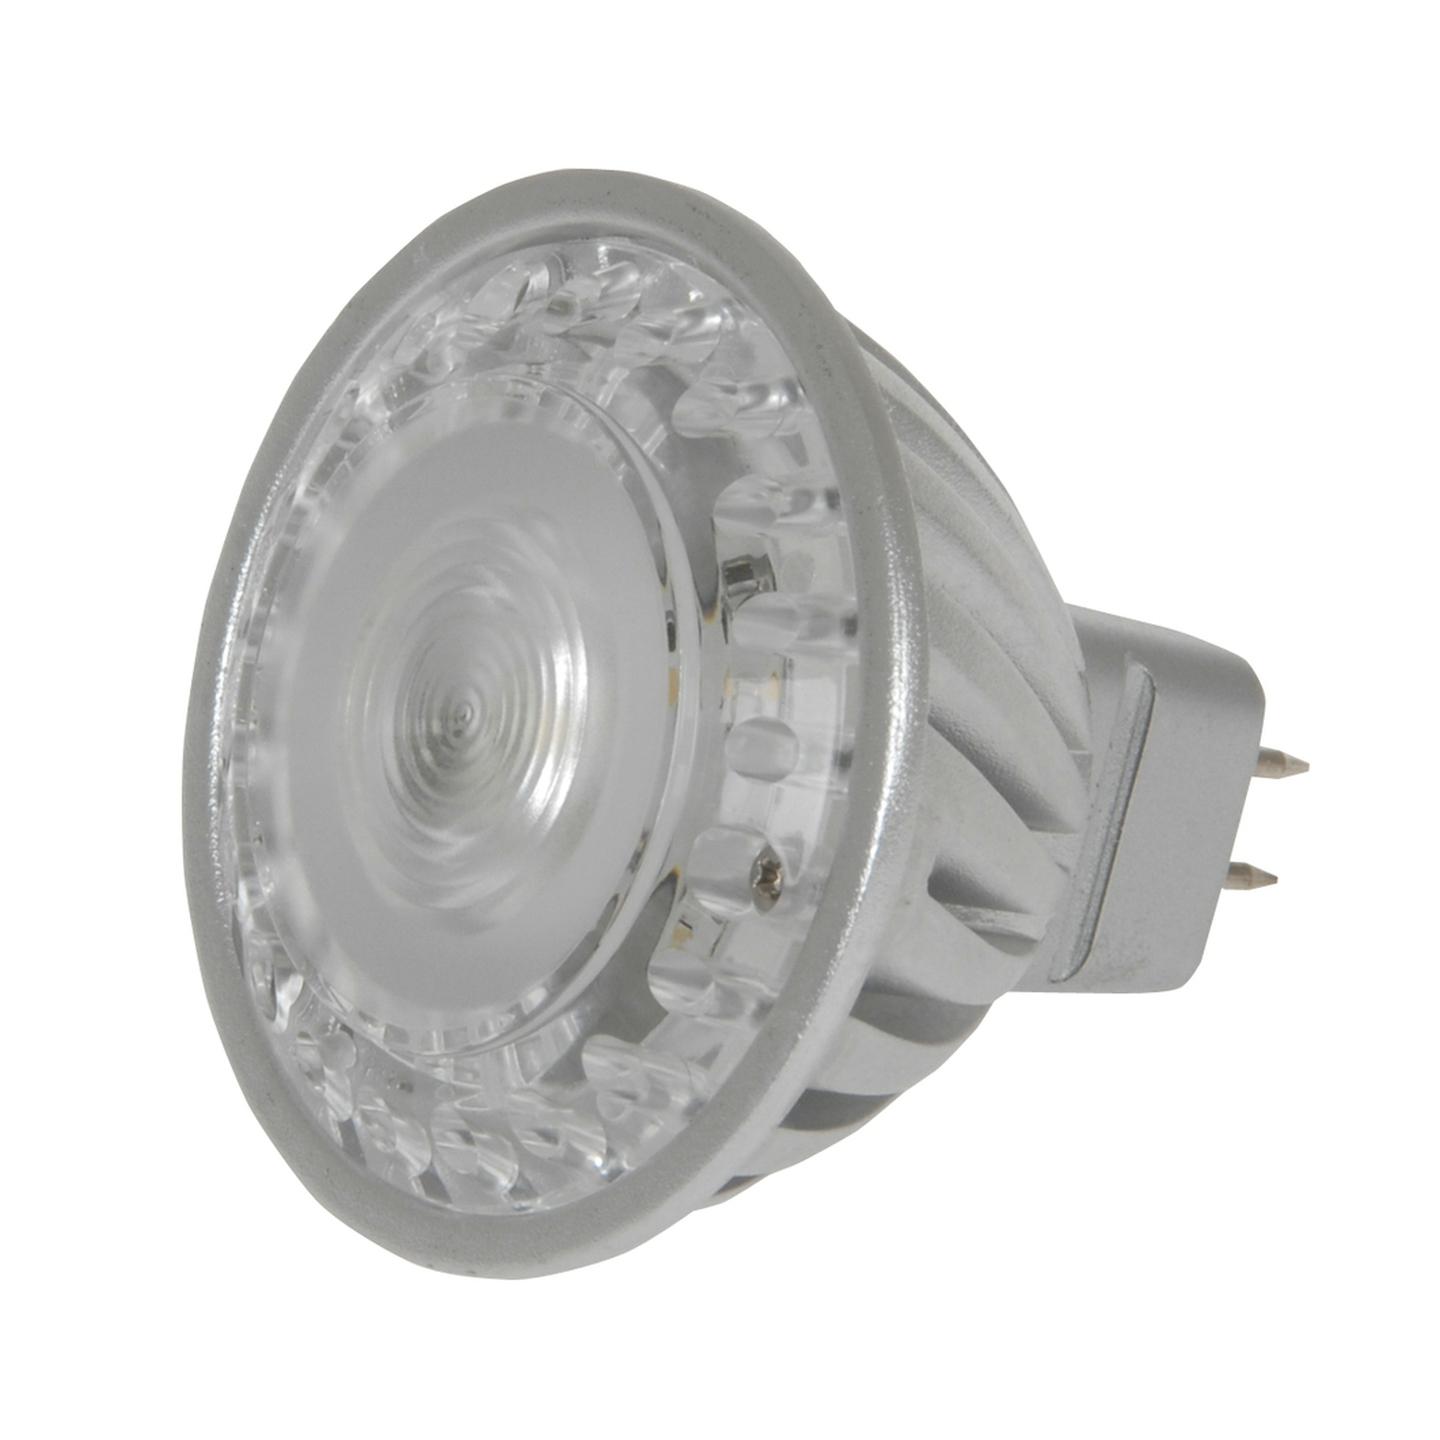 Cree XR MR16 Replacement Lamp 38